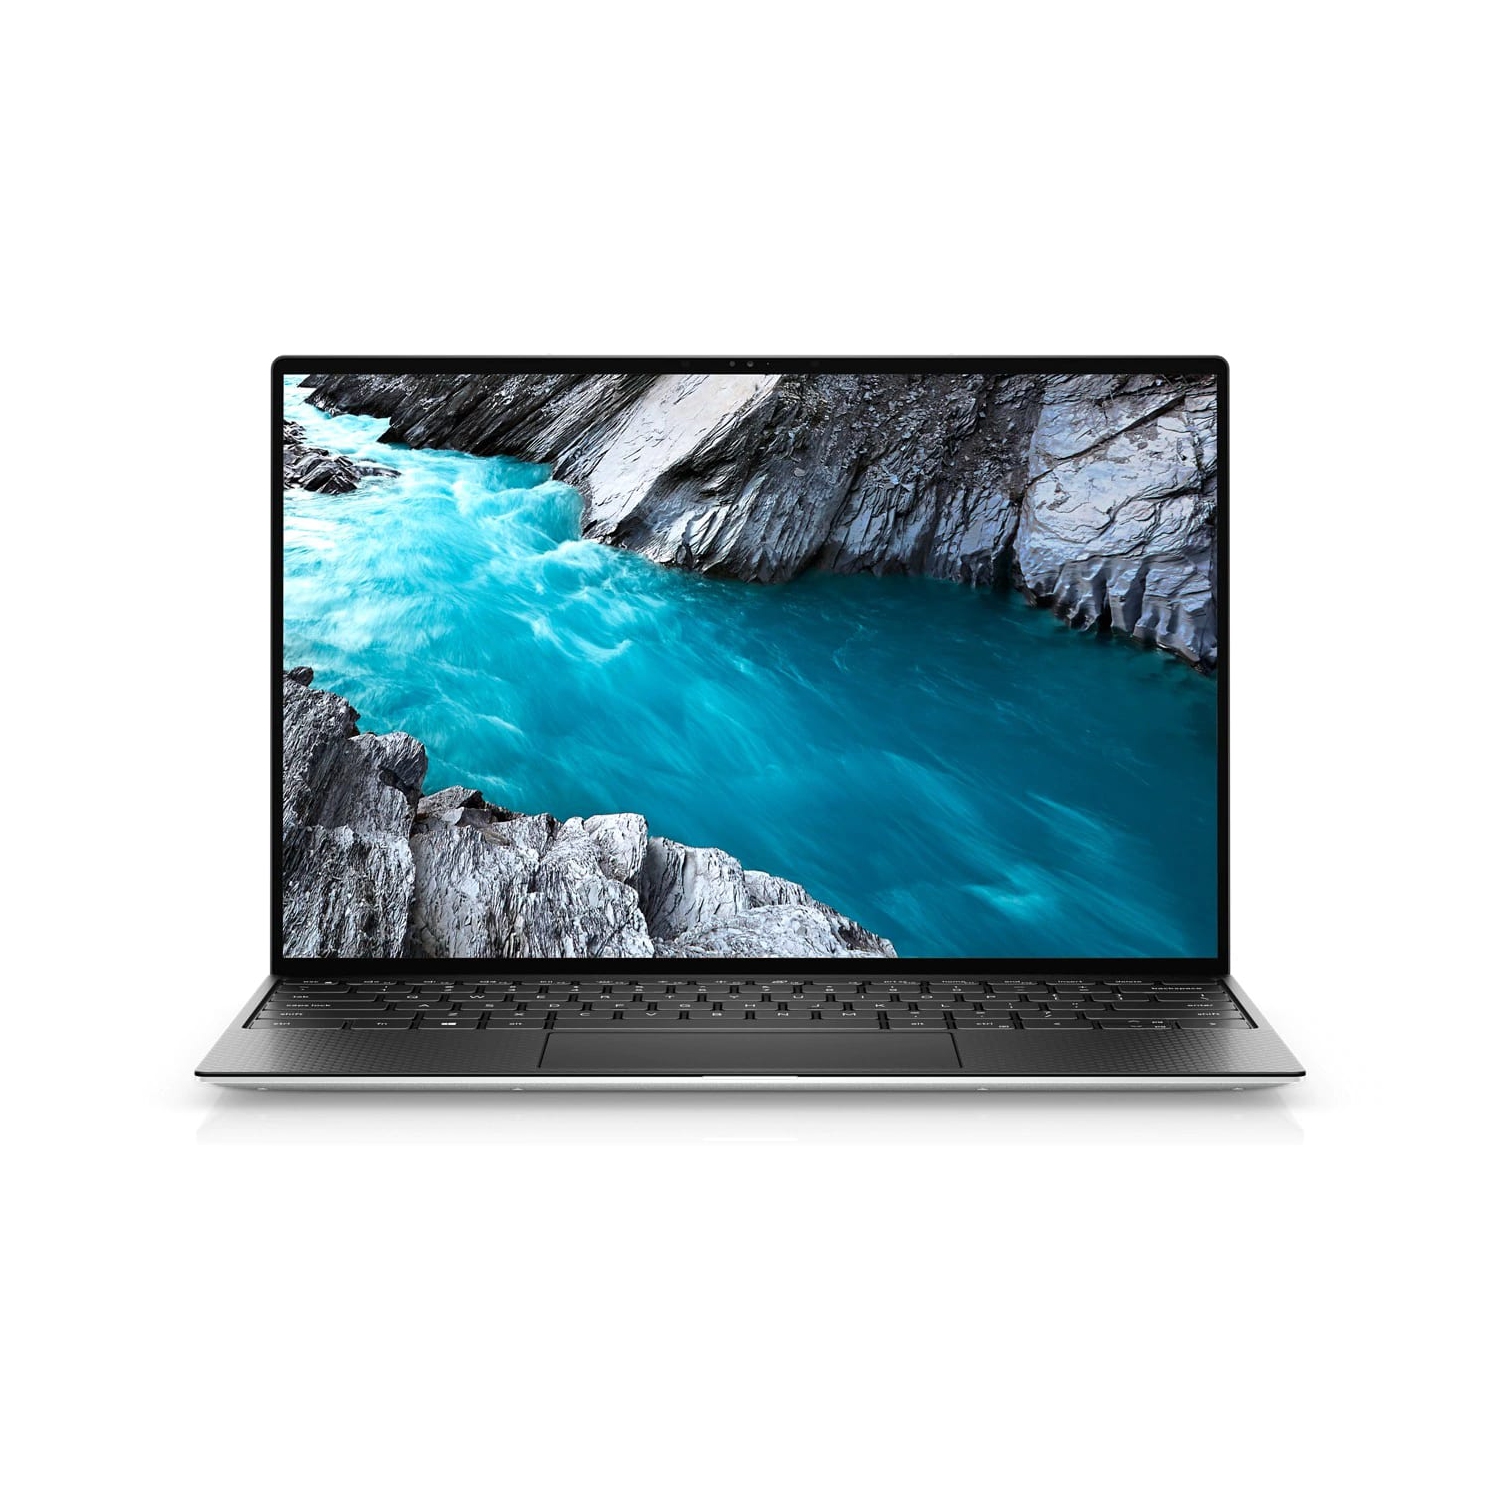 Refurbished (Excellent) - Dell XPS 13 9310 Laptop (2020) | 13.4" 4K Touch | Core i7 - 1TB SSD - 32GB RAM | 4 Cores @ 5 GHz - 11th Gen CPU Certified Refurbished